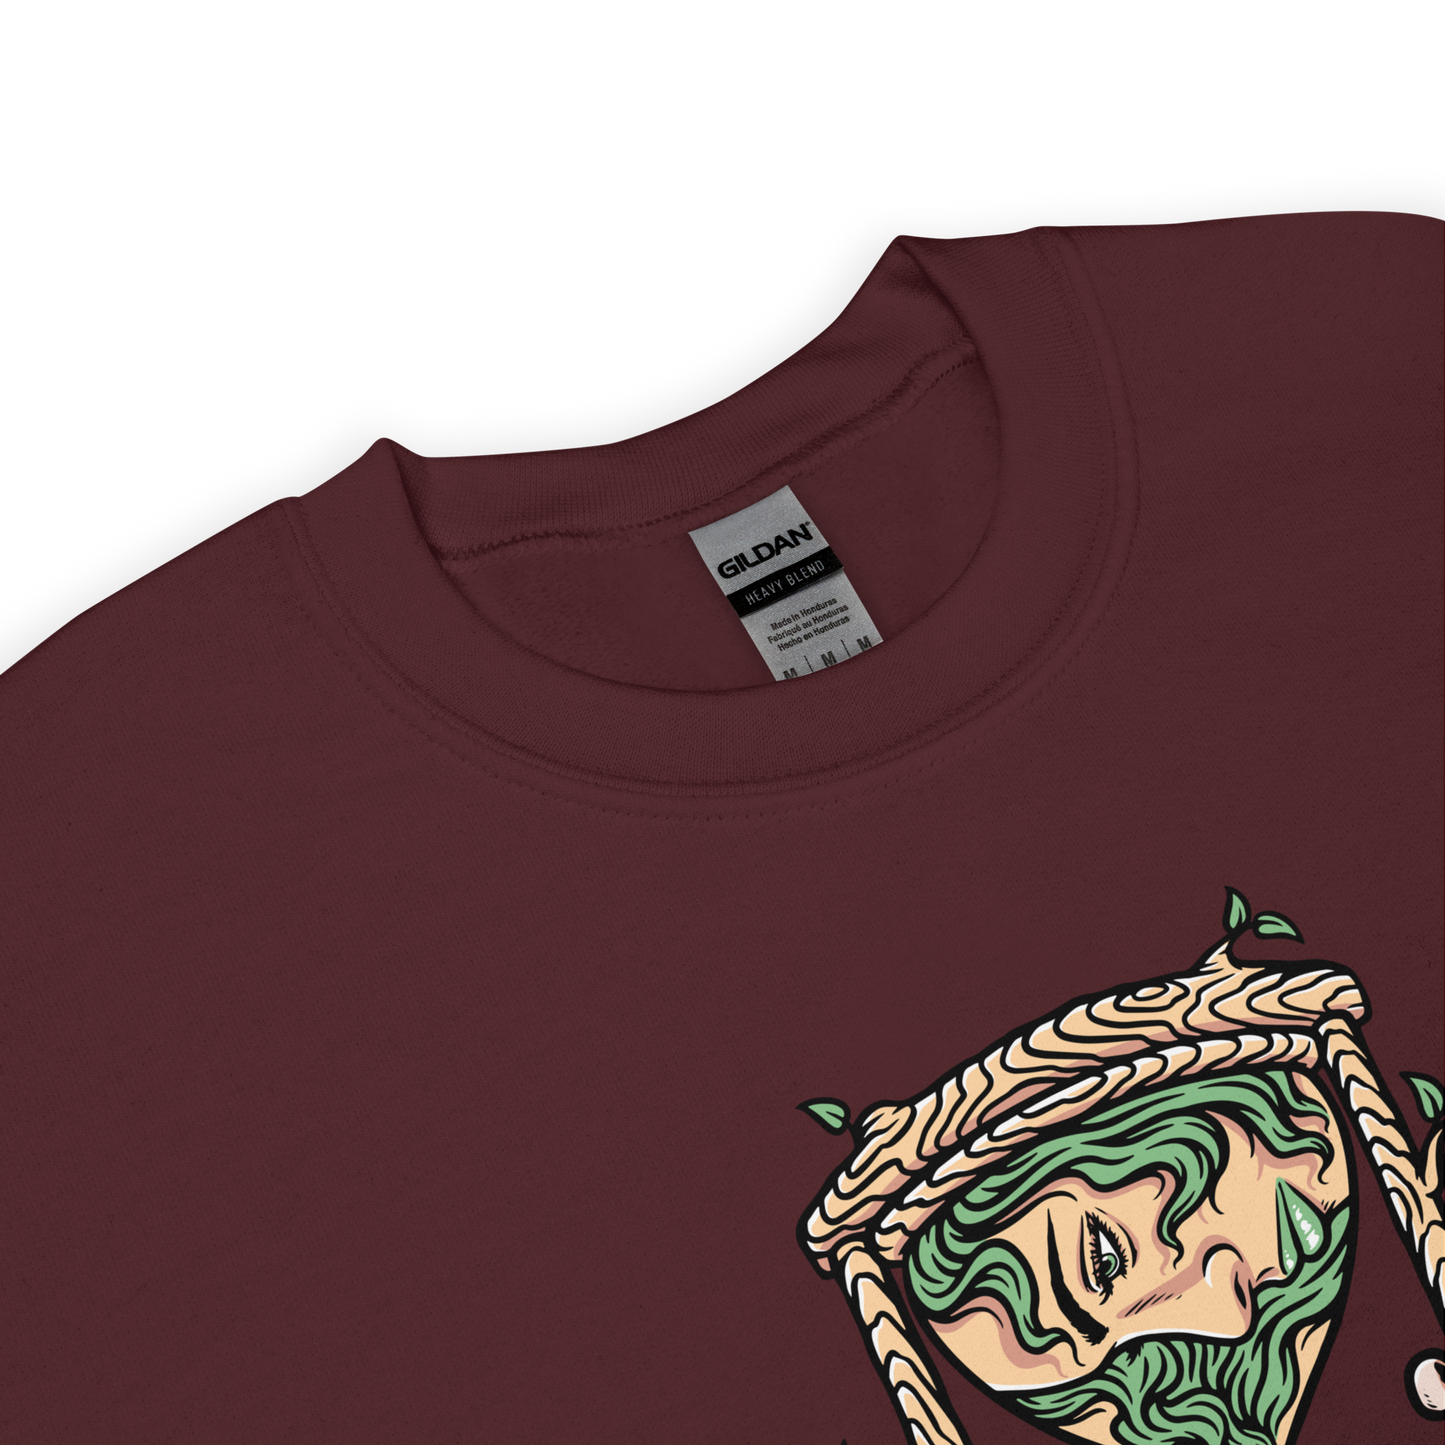 Product details of a Maroon Hourglass Sweatshirt featuring a captivating Time Won't Wait graphic on the chest - Cool Graphic Hourglass Sweatshirts - Boozy Fox